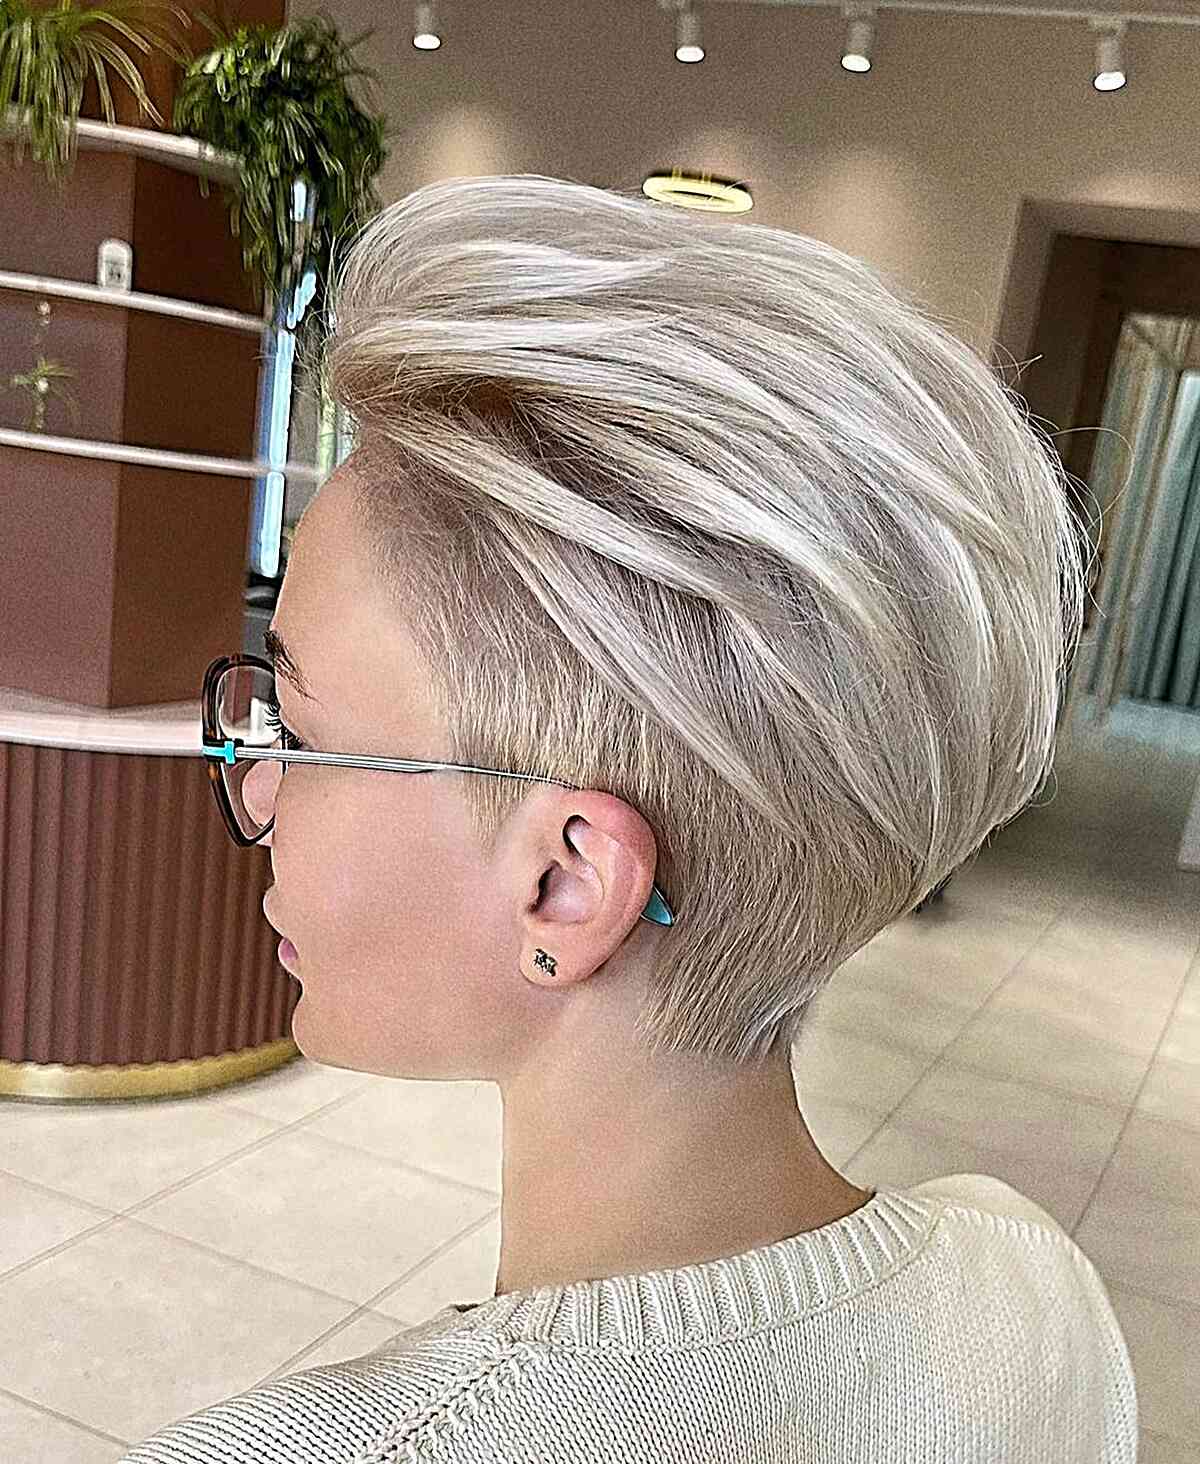 Short Slicked Back Layered Hair for Women with thick hair and a shaved nape